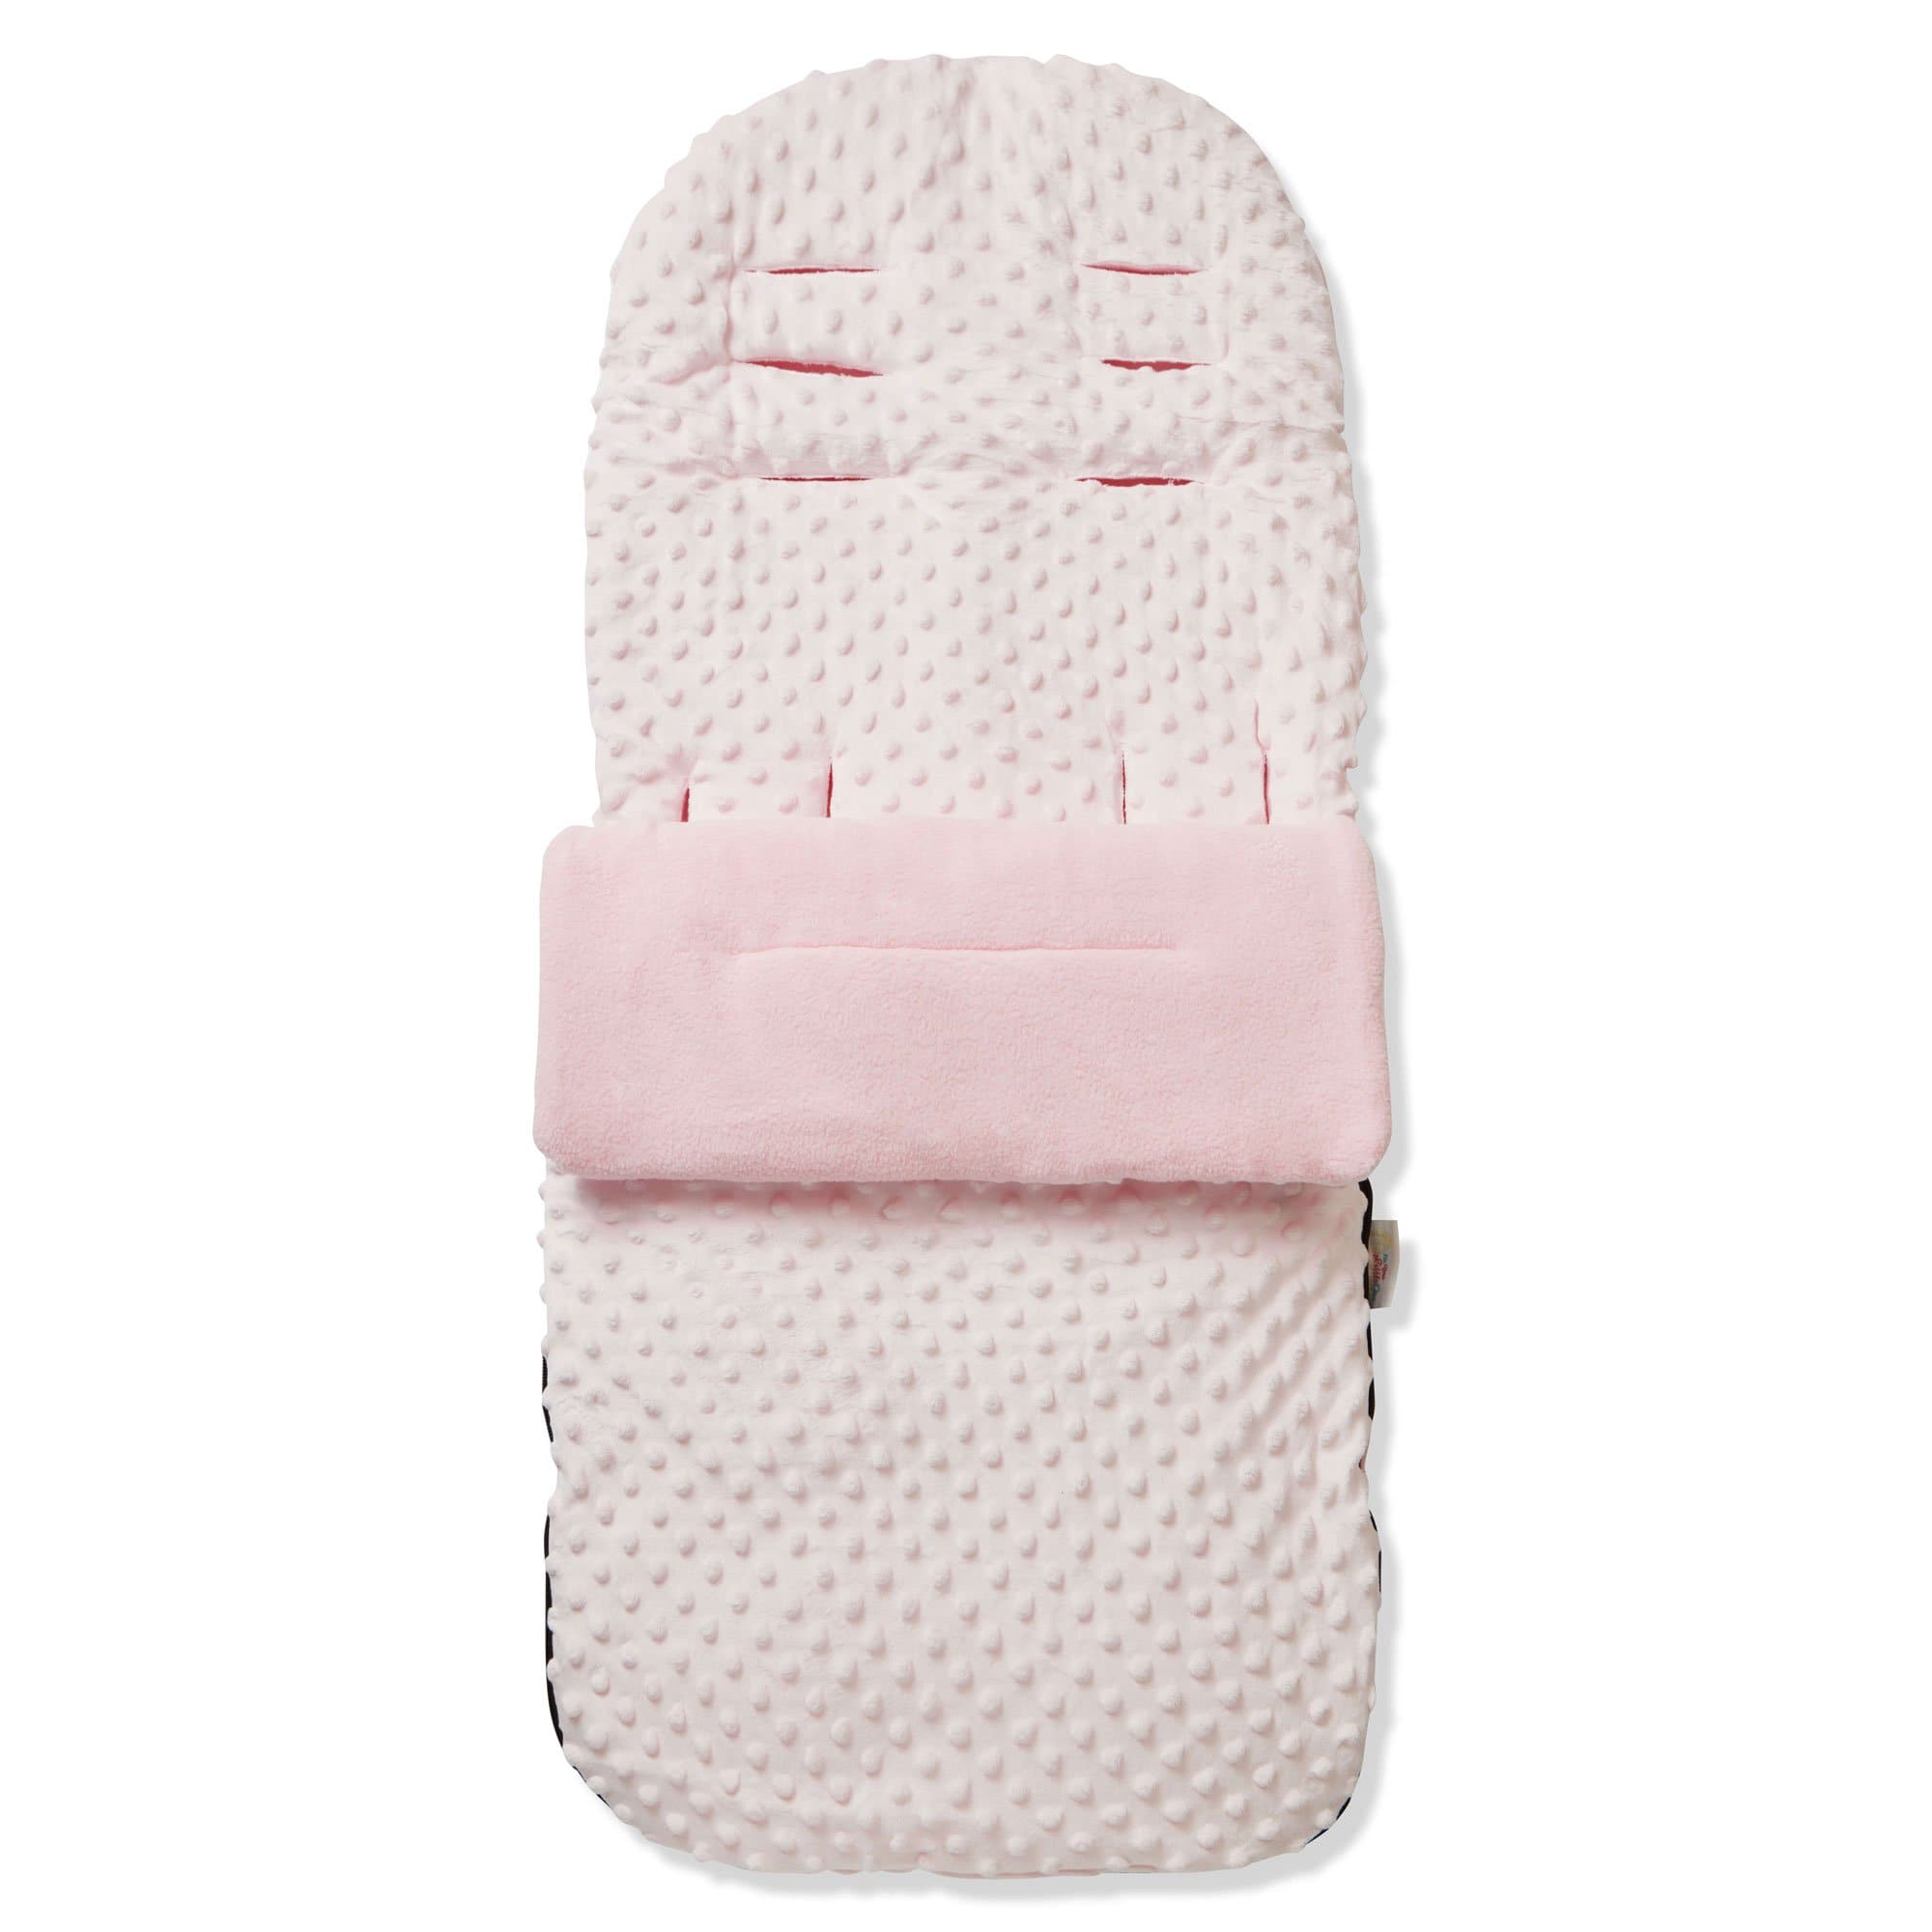 Dimple Footmuff / Cosy Toes Compatible with Maxi Cosi - Pink / Fits All Models | For Your Little One